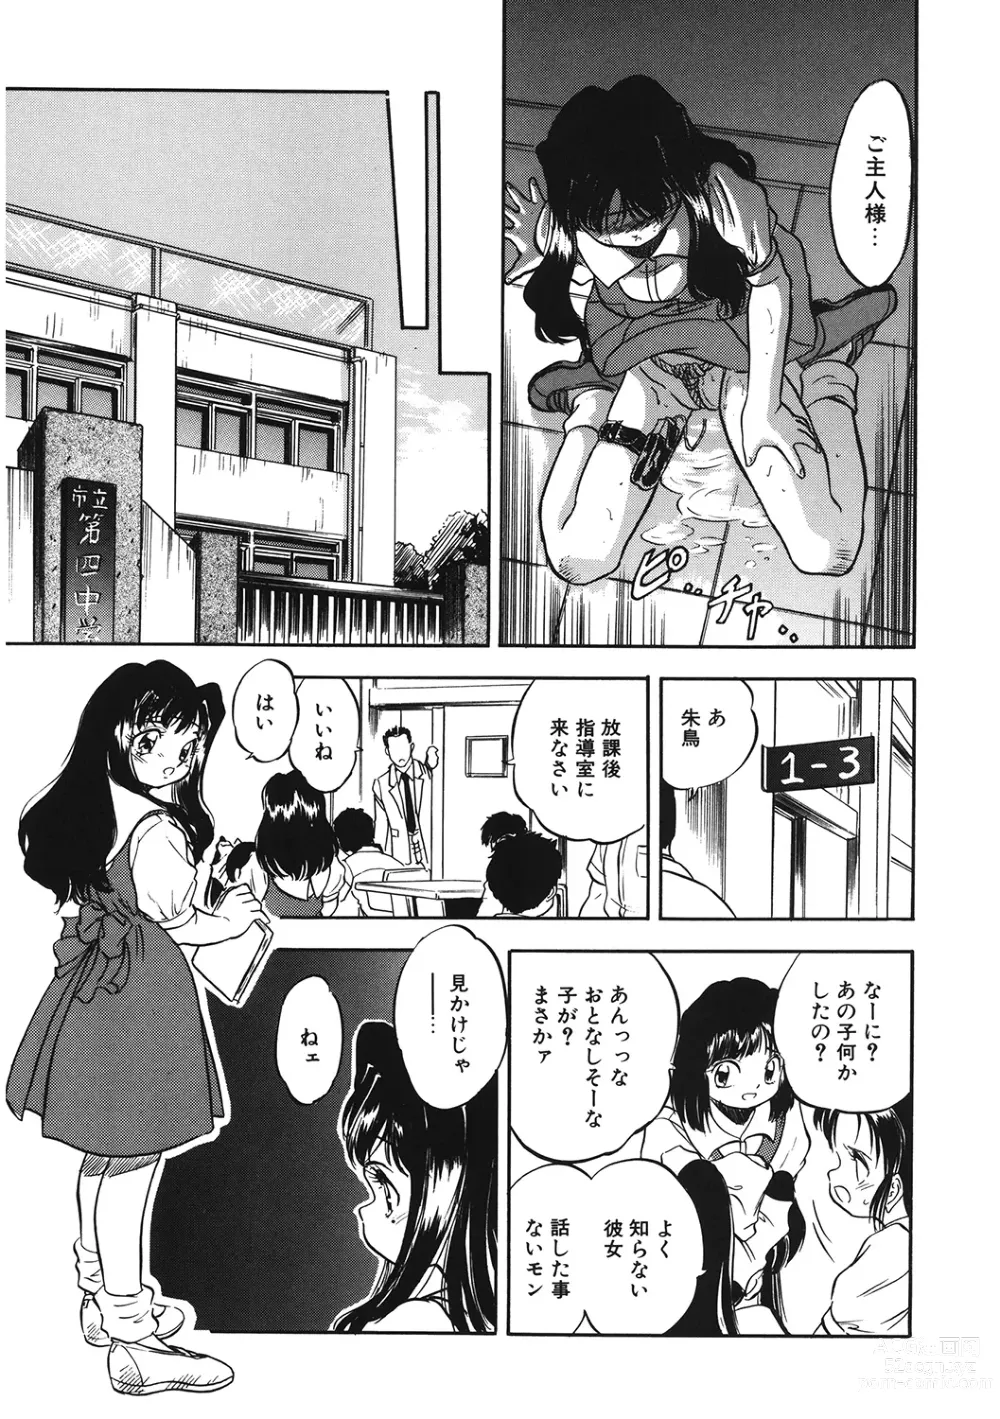 Page 9 of manga LQ -Little Queen- Vol. 52